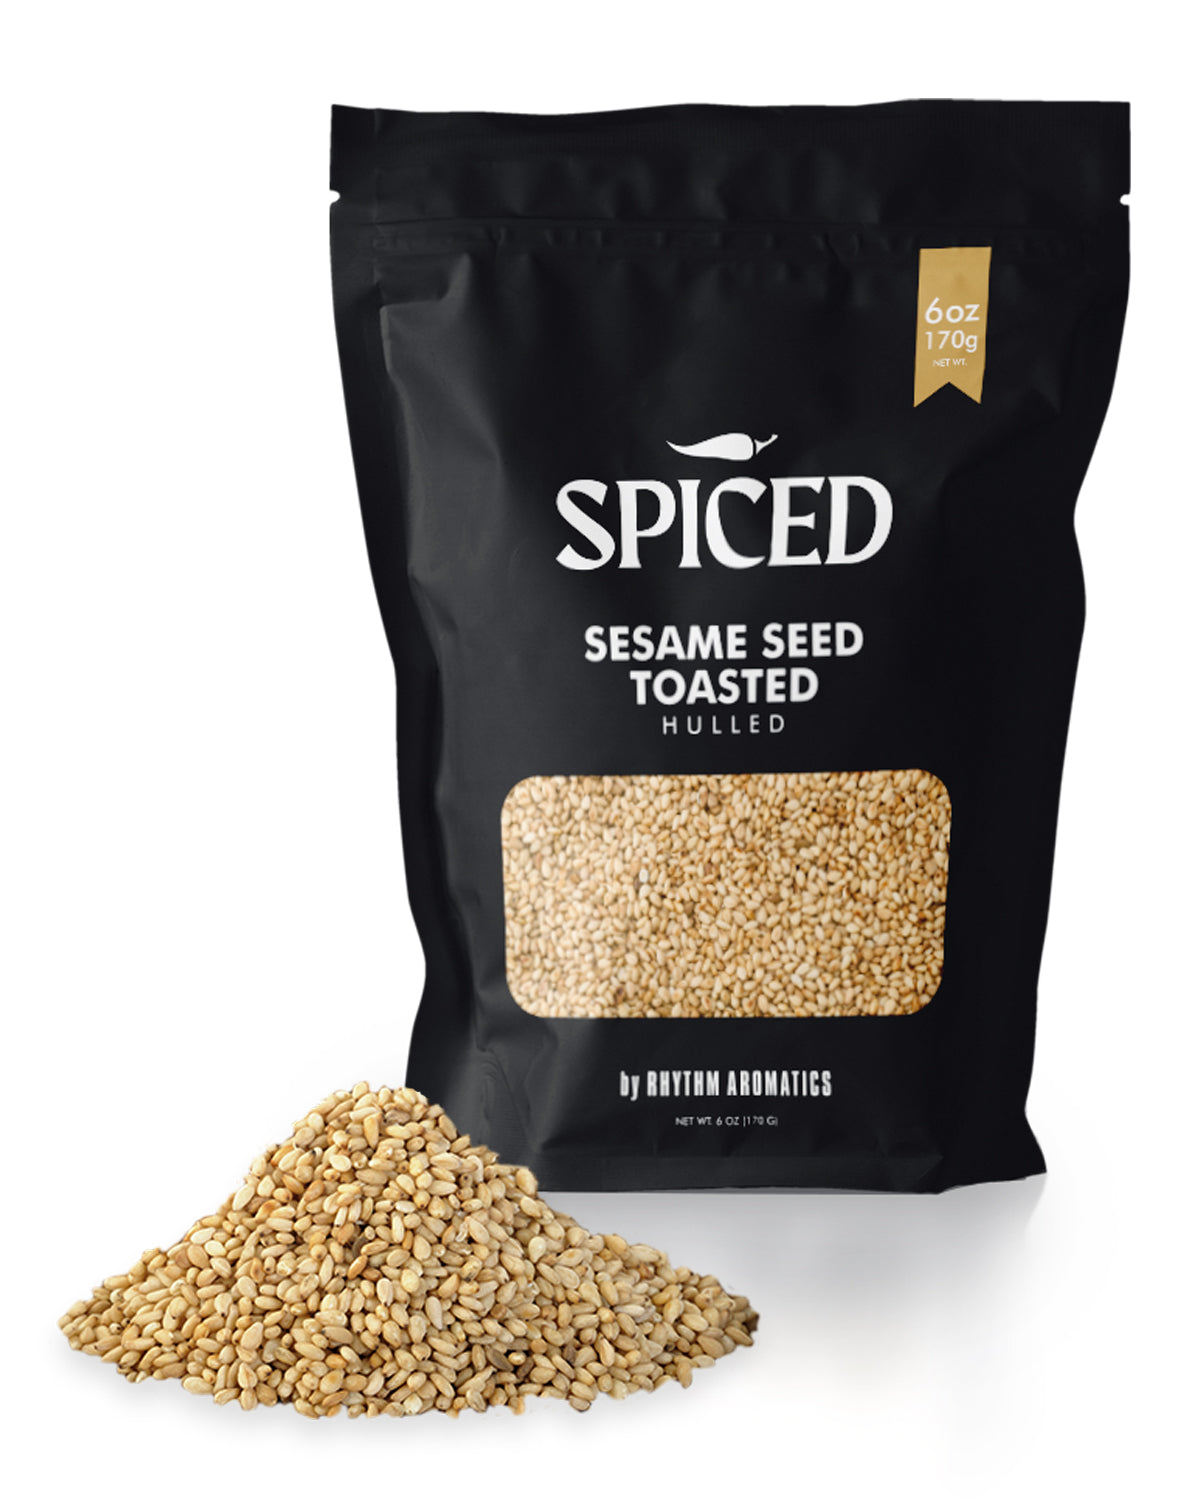 SPICED Toasted White Sesame Seeds,  Toasted and Hulled White Sesame Seeds for Flavor, Seasoning, Cooking, Crunch or Plating.